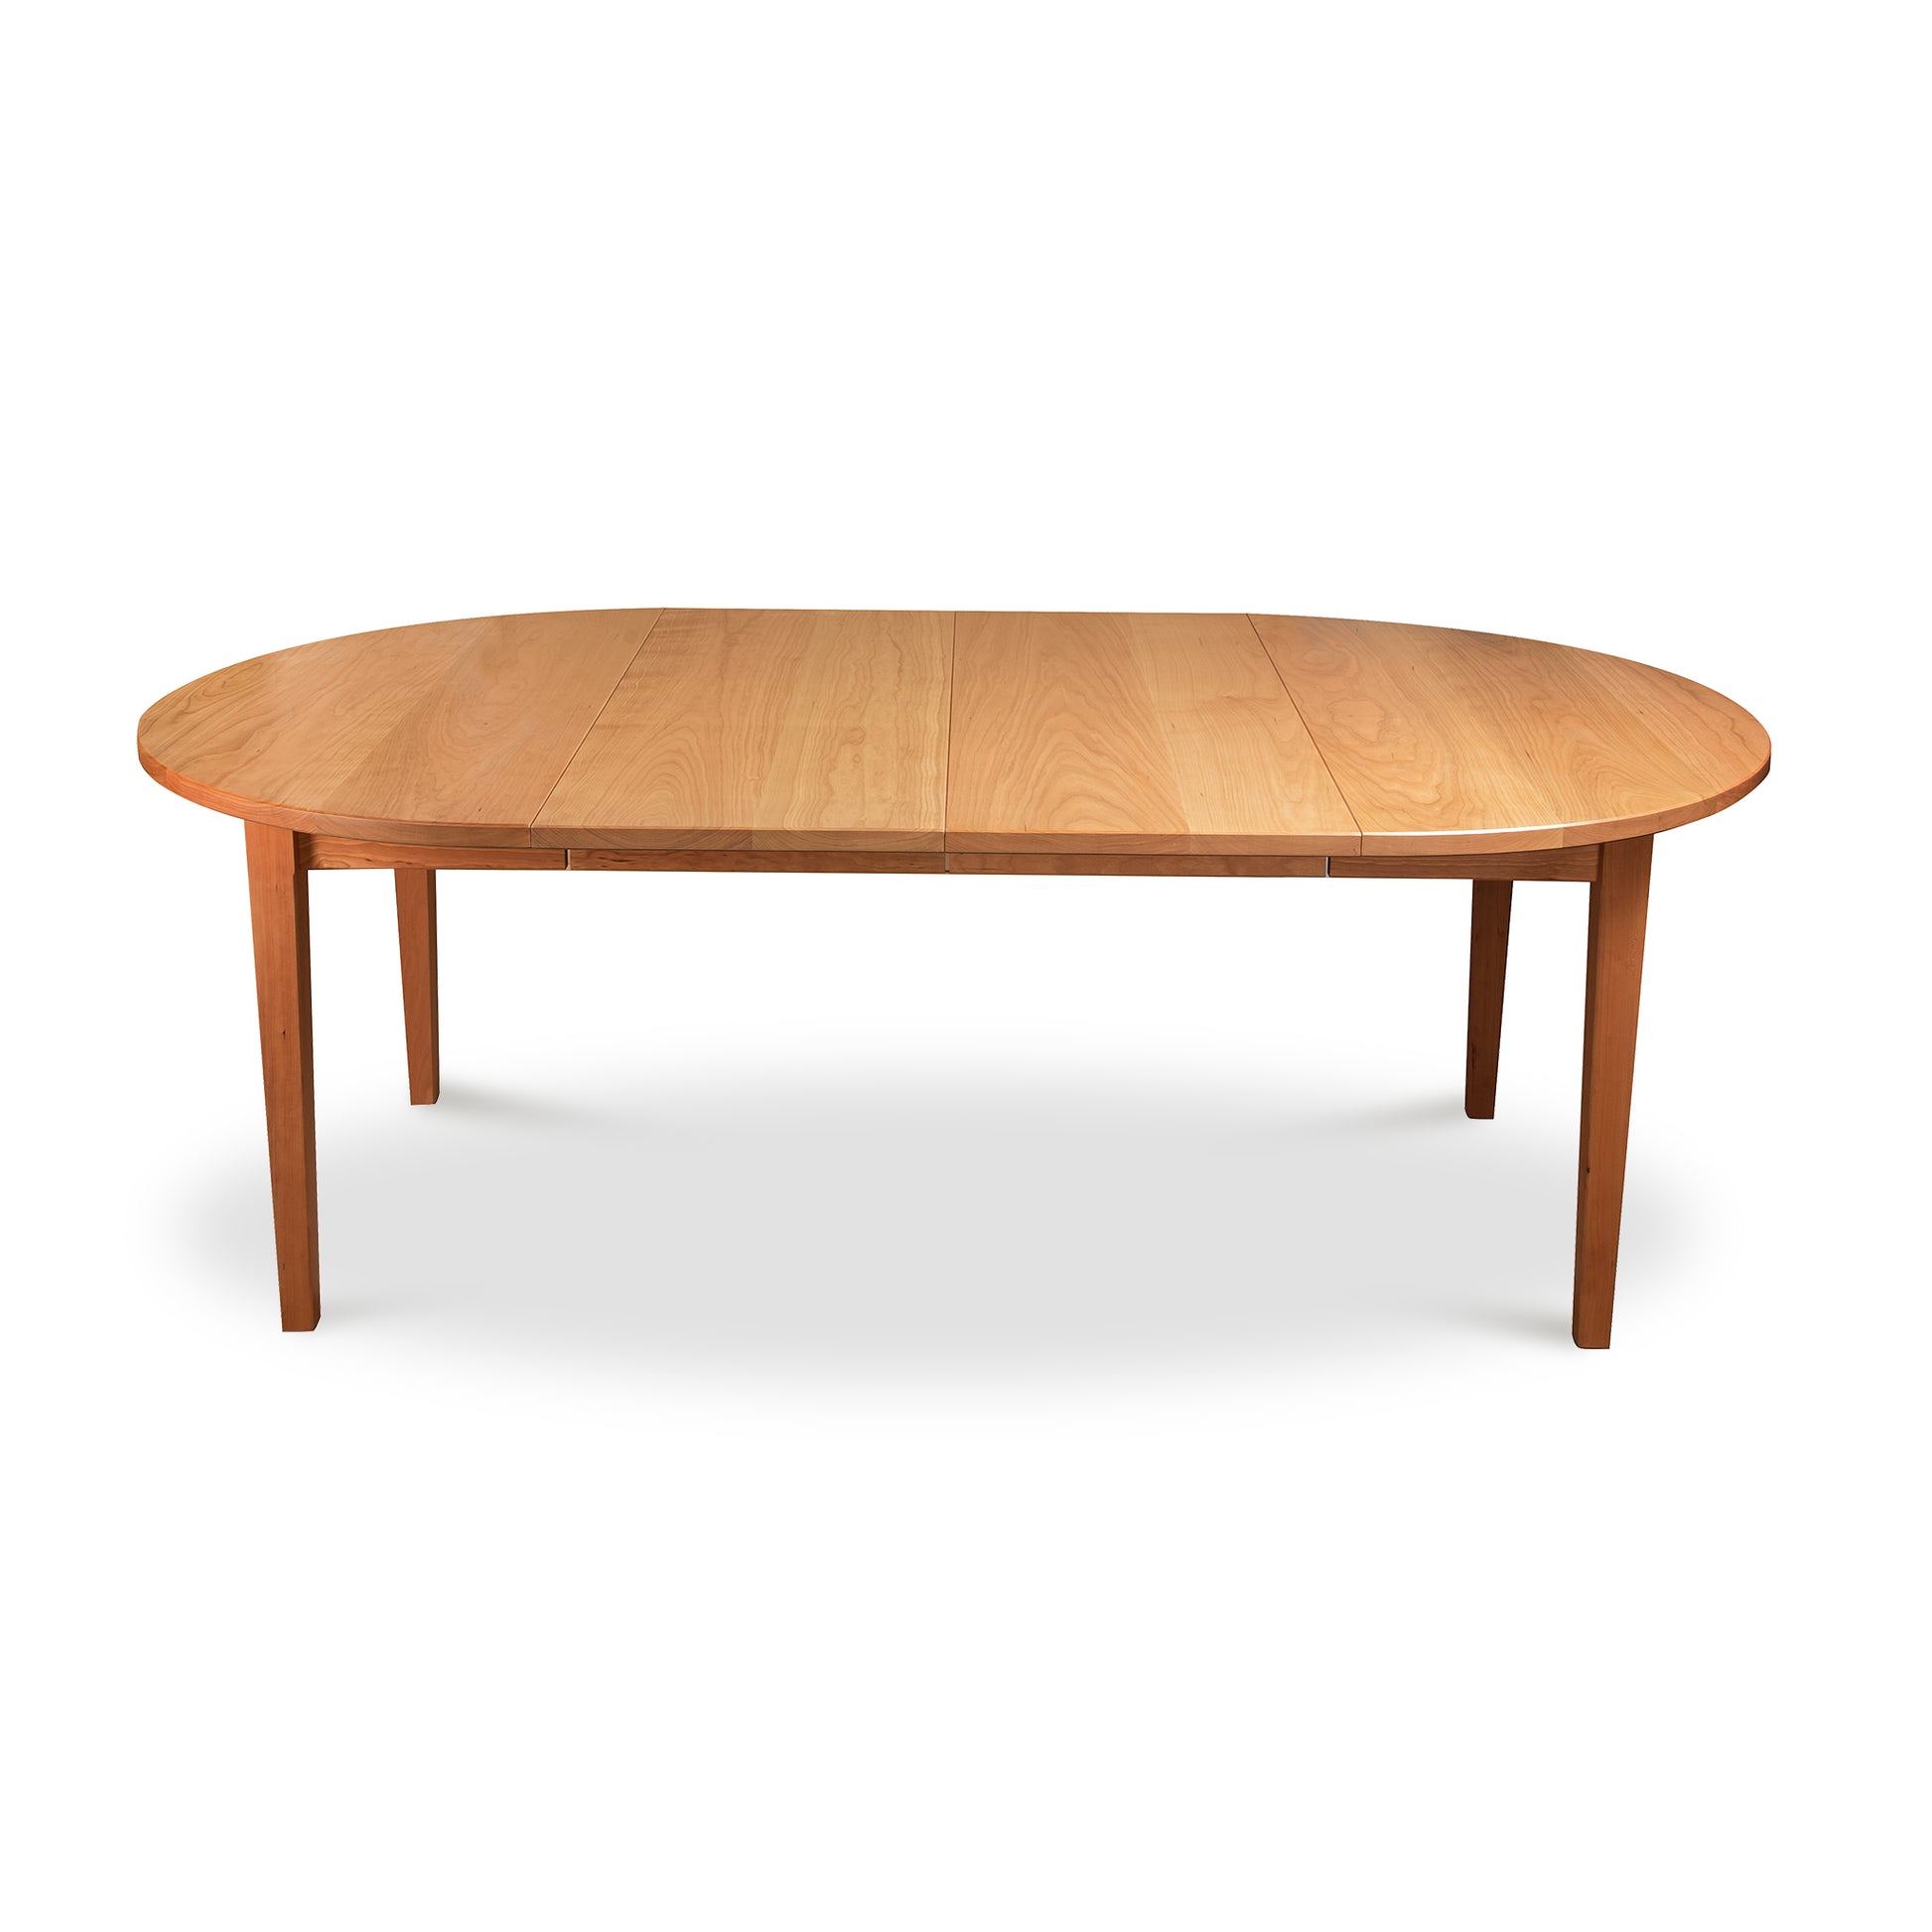 An Vermont Shaker Round Extension Table with a smooth top and straight legs, crafted from natural cherry, isolated on a white background.